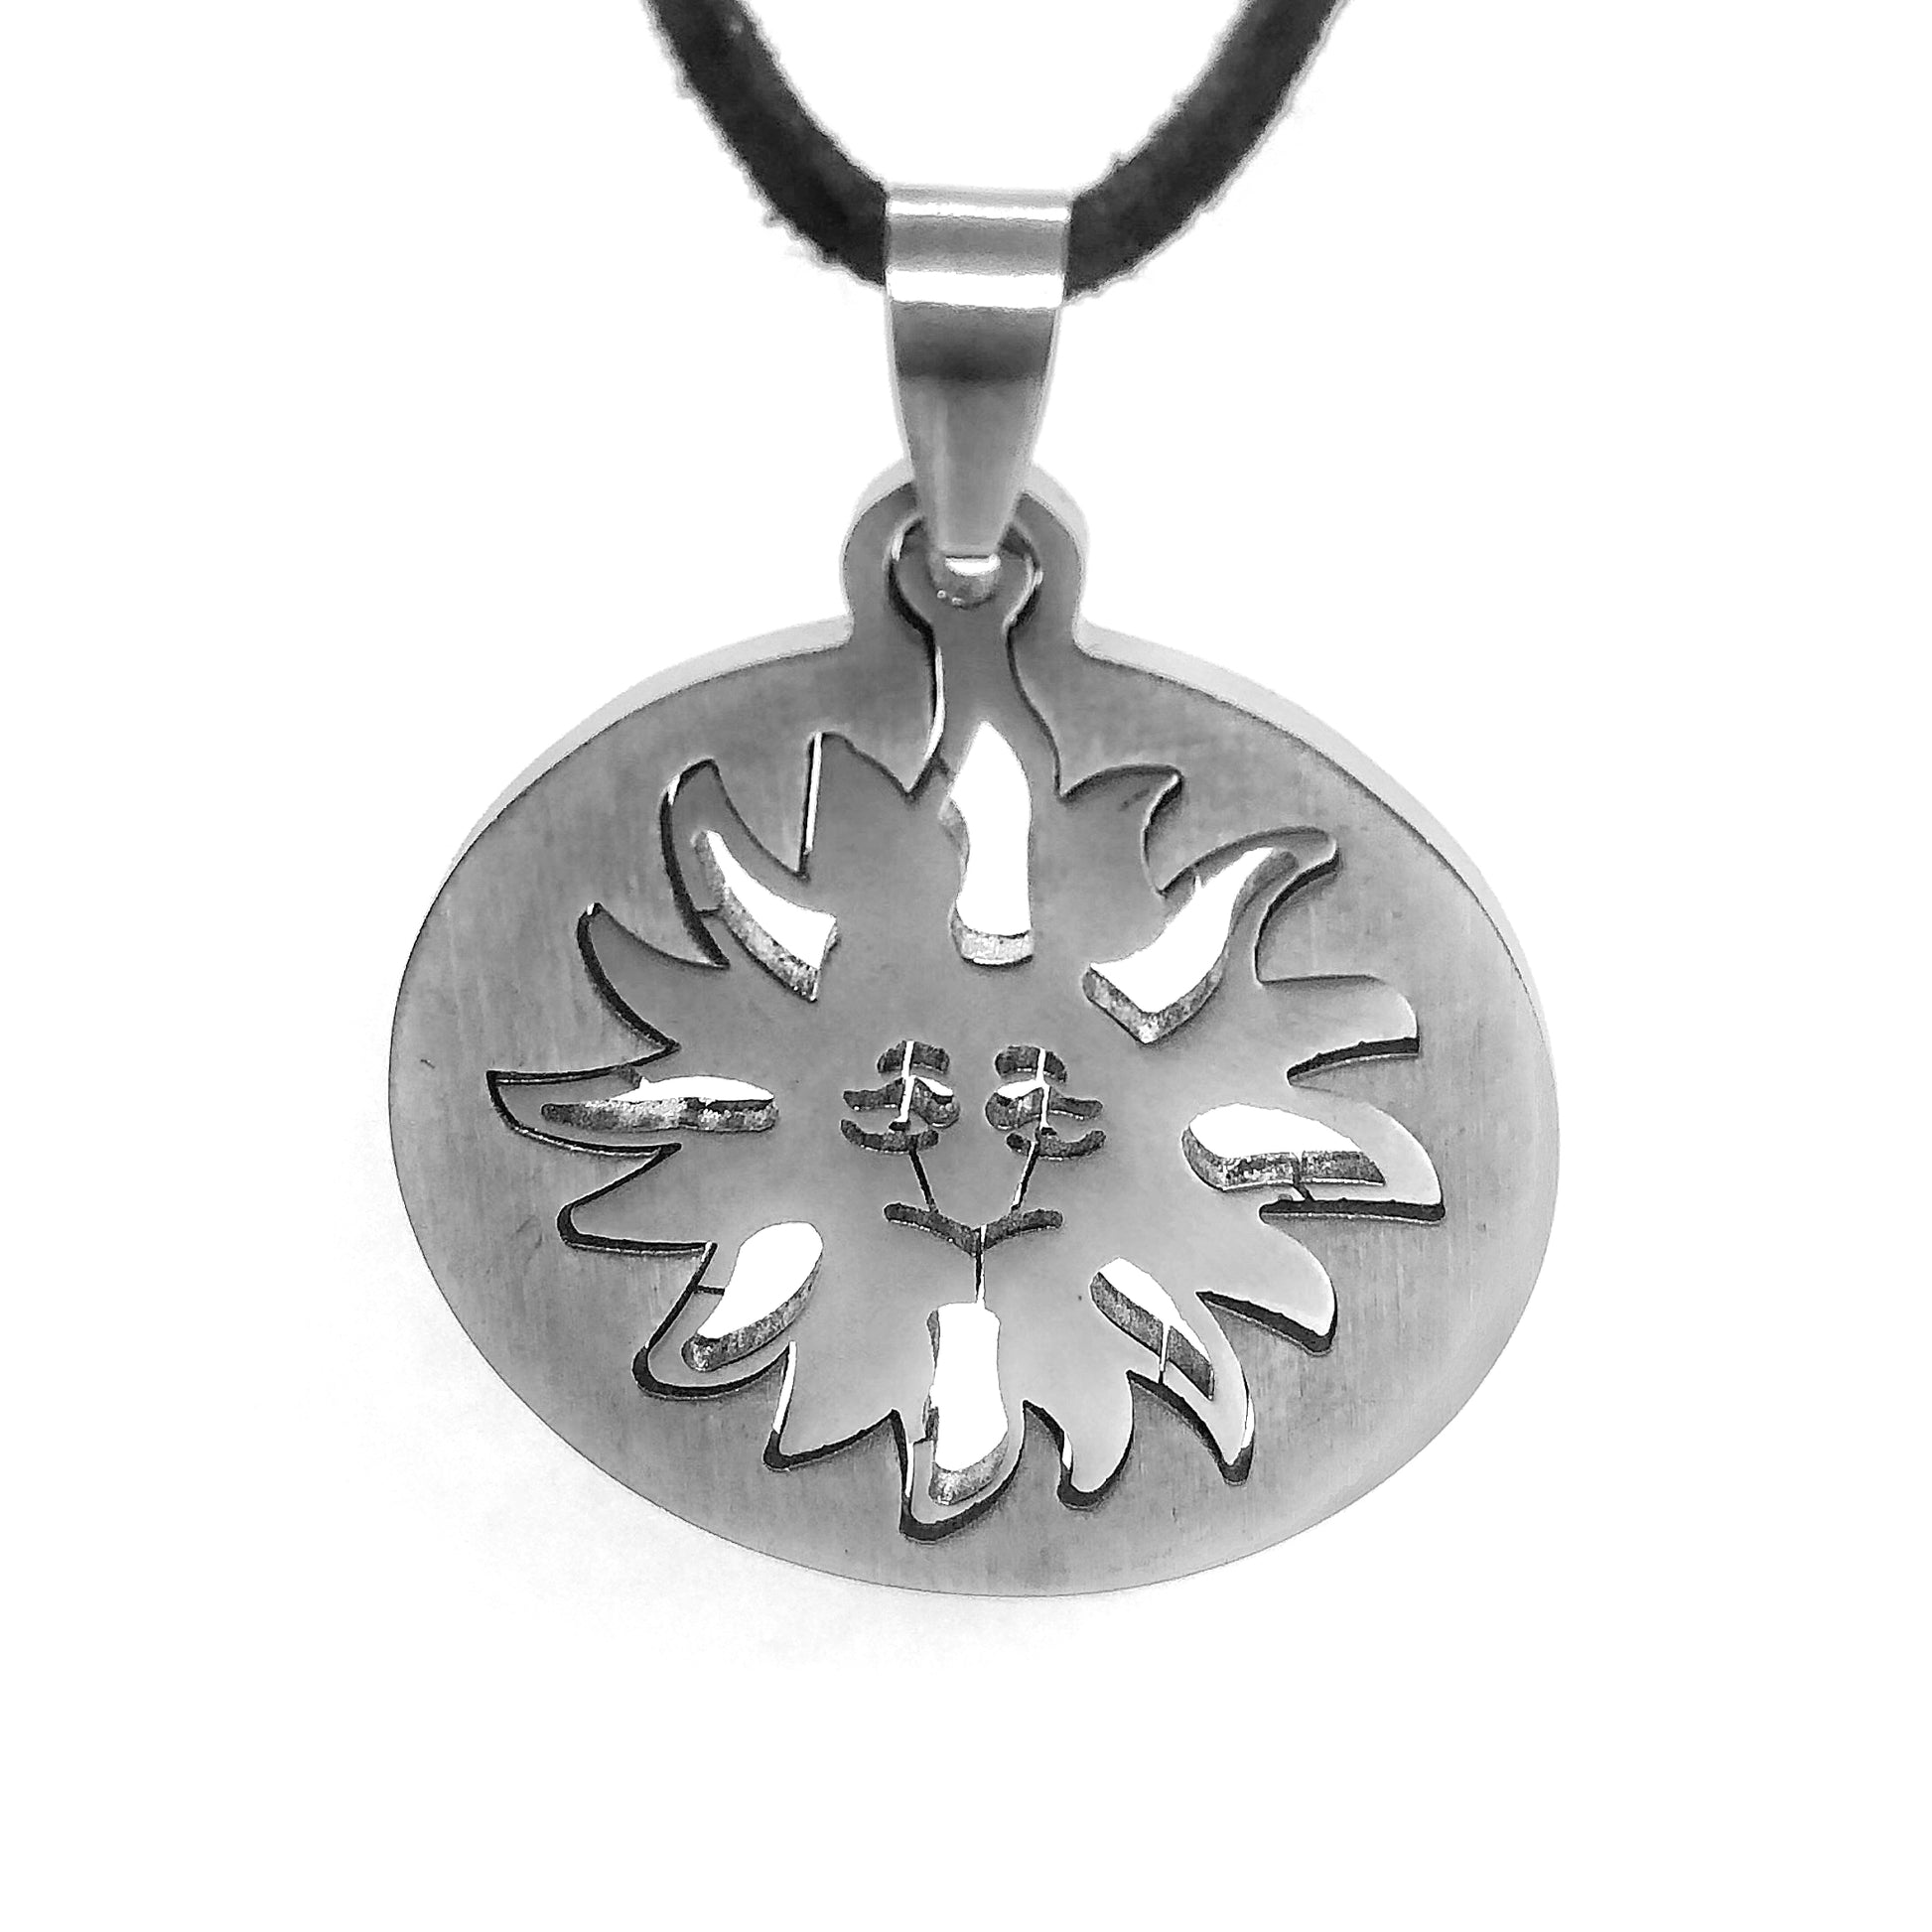 feshionn-iobi-sunny-2-piece-cut-out-stainless-steel-puzzle-pendant